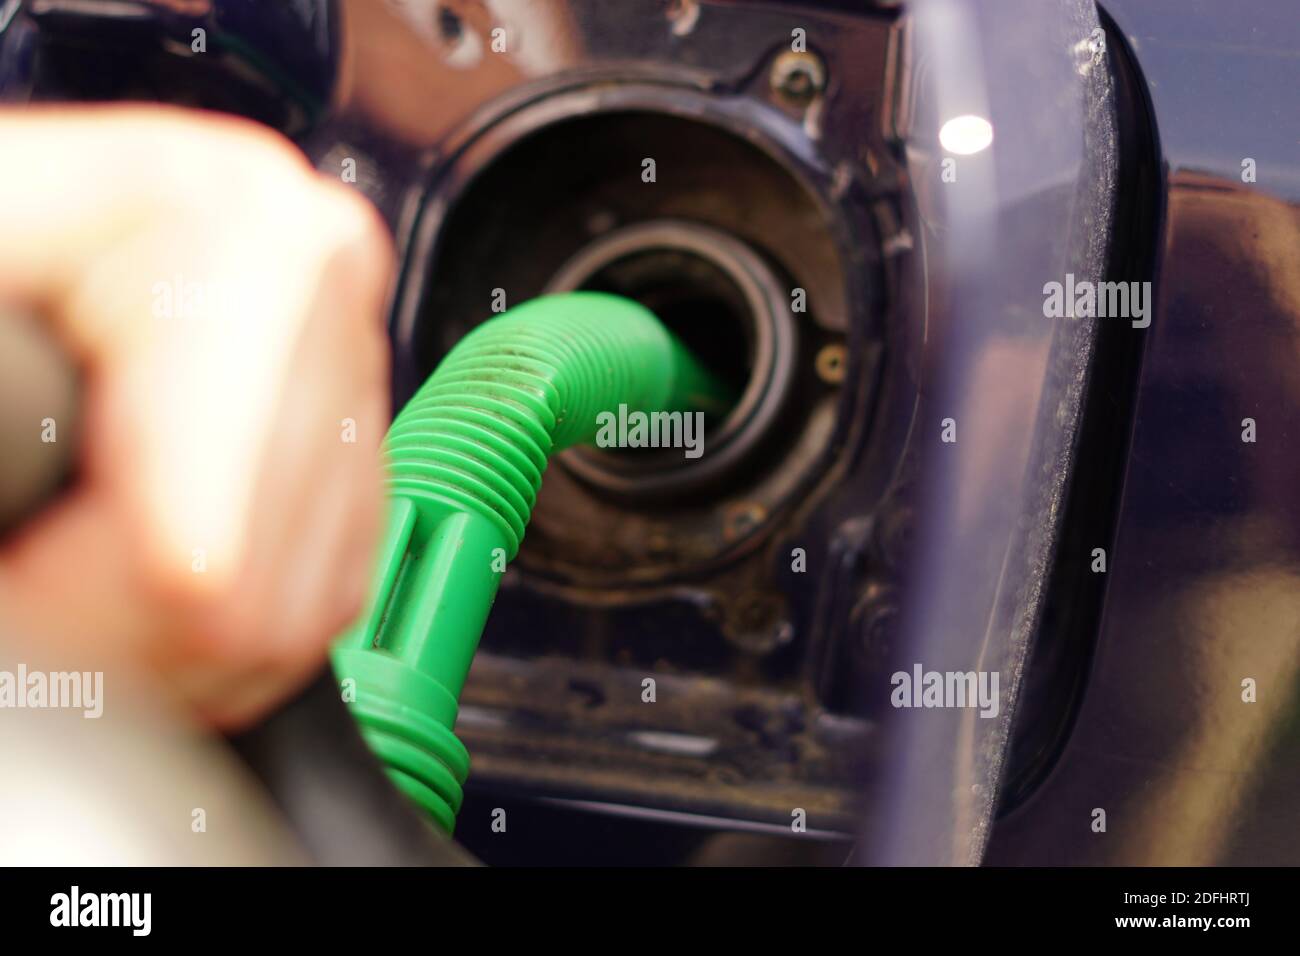 refueling gas with a fuel canister Stock Photo